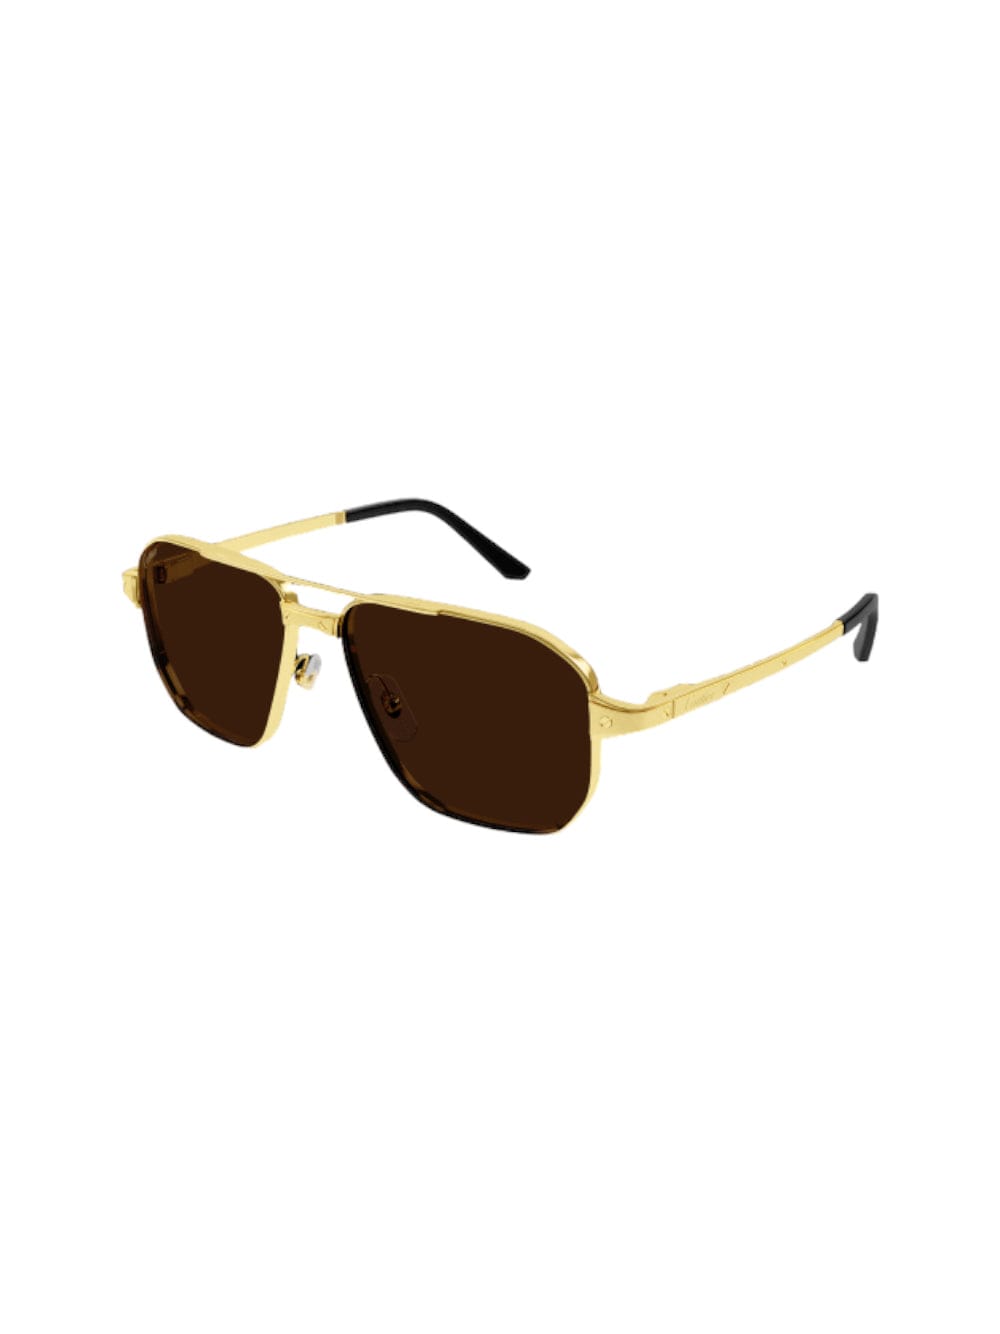 Cartier Ct0424 - Gold Glasses